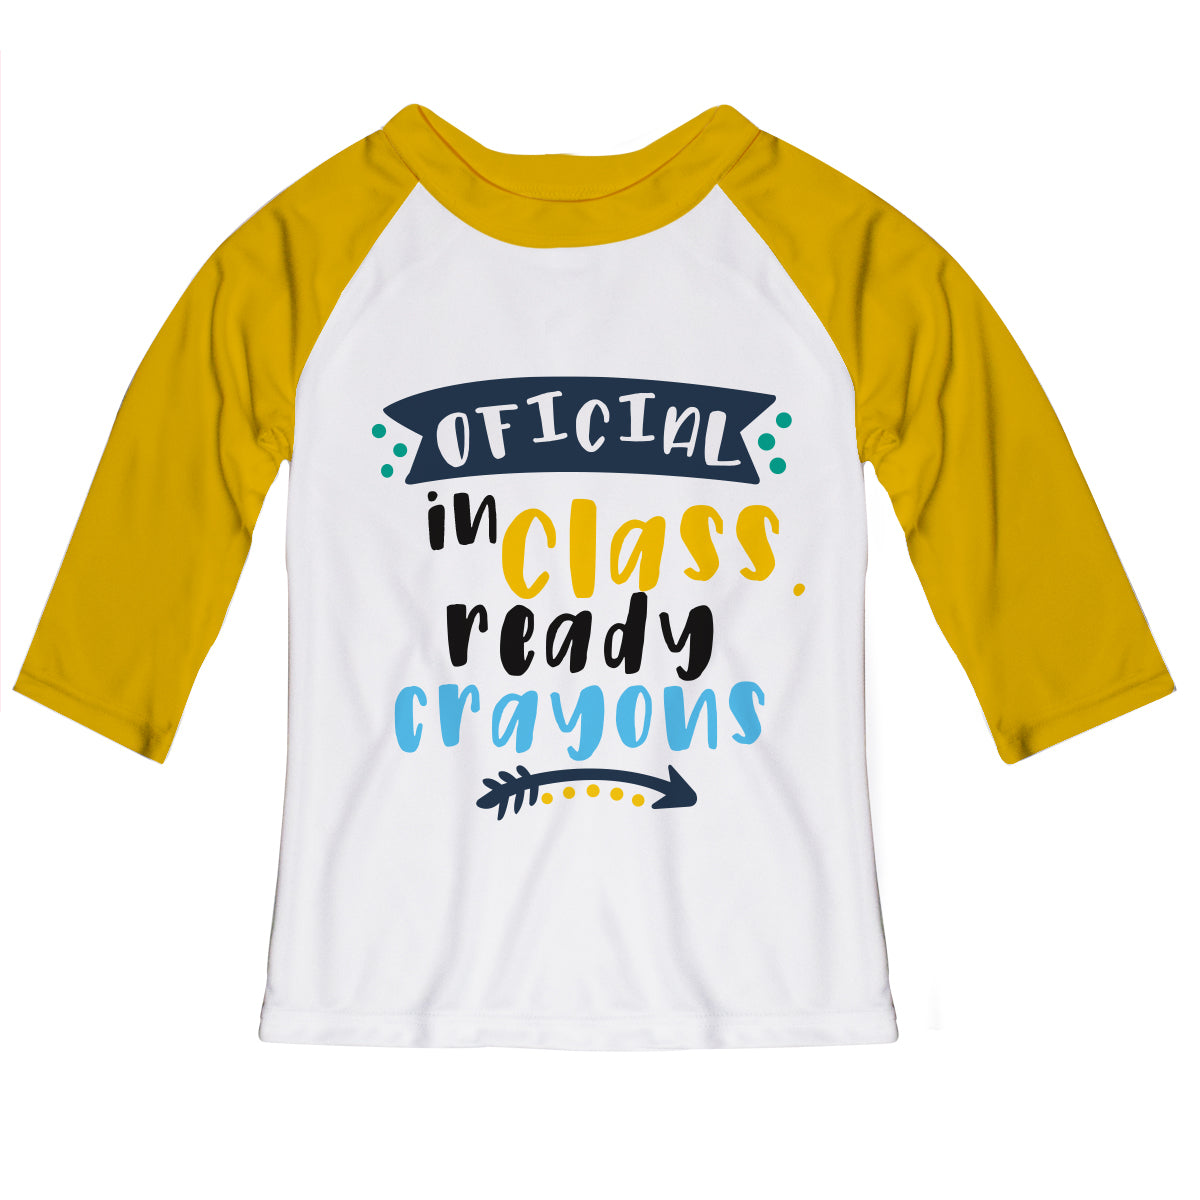 Oficcial In Class Ready Crayons White and Mustard Raglan Tee Shirt 3/4 Sleeve